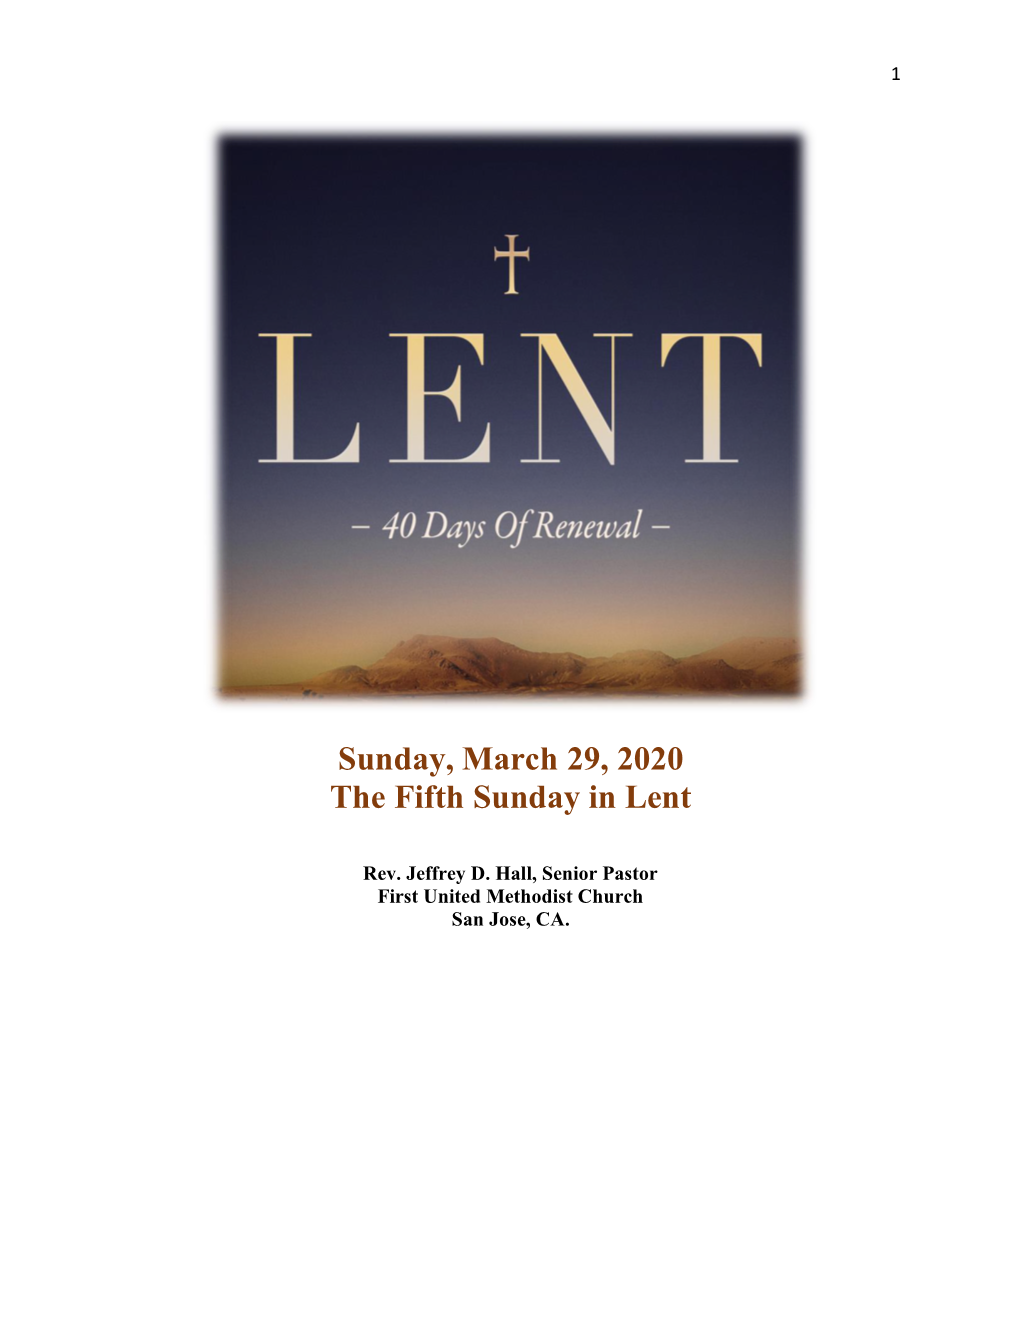 Sunday, March 29, 2020 the Fifth Sunday in Lent